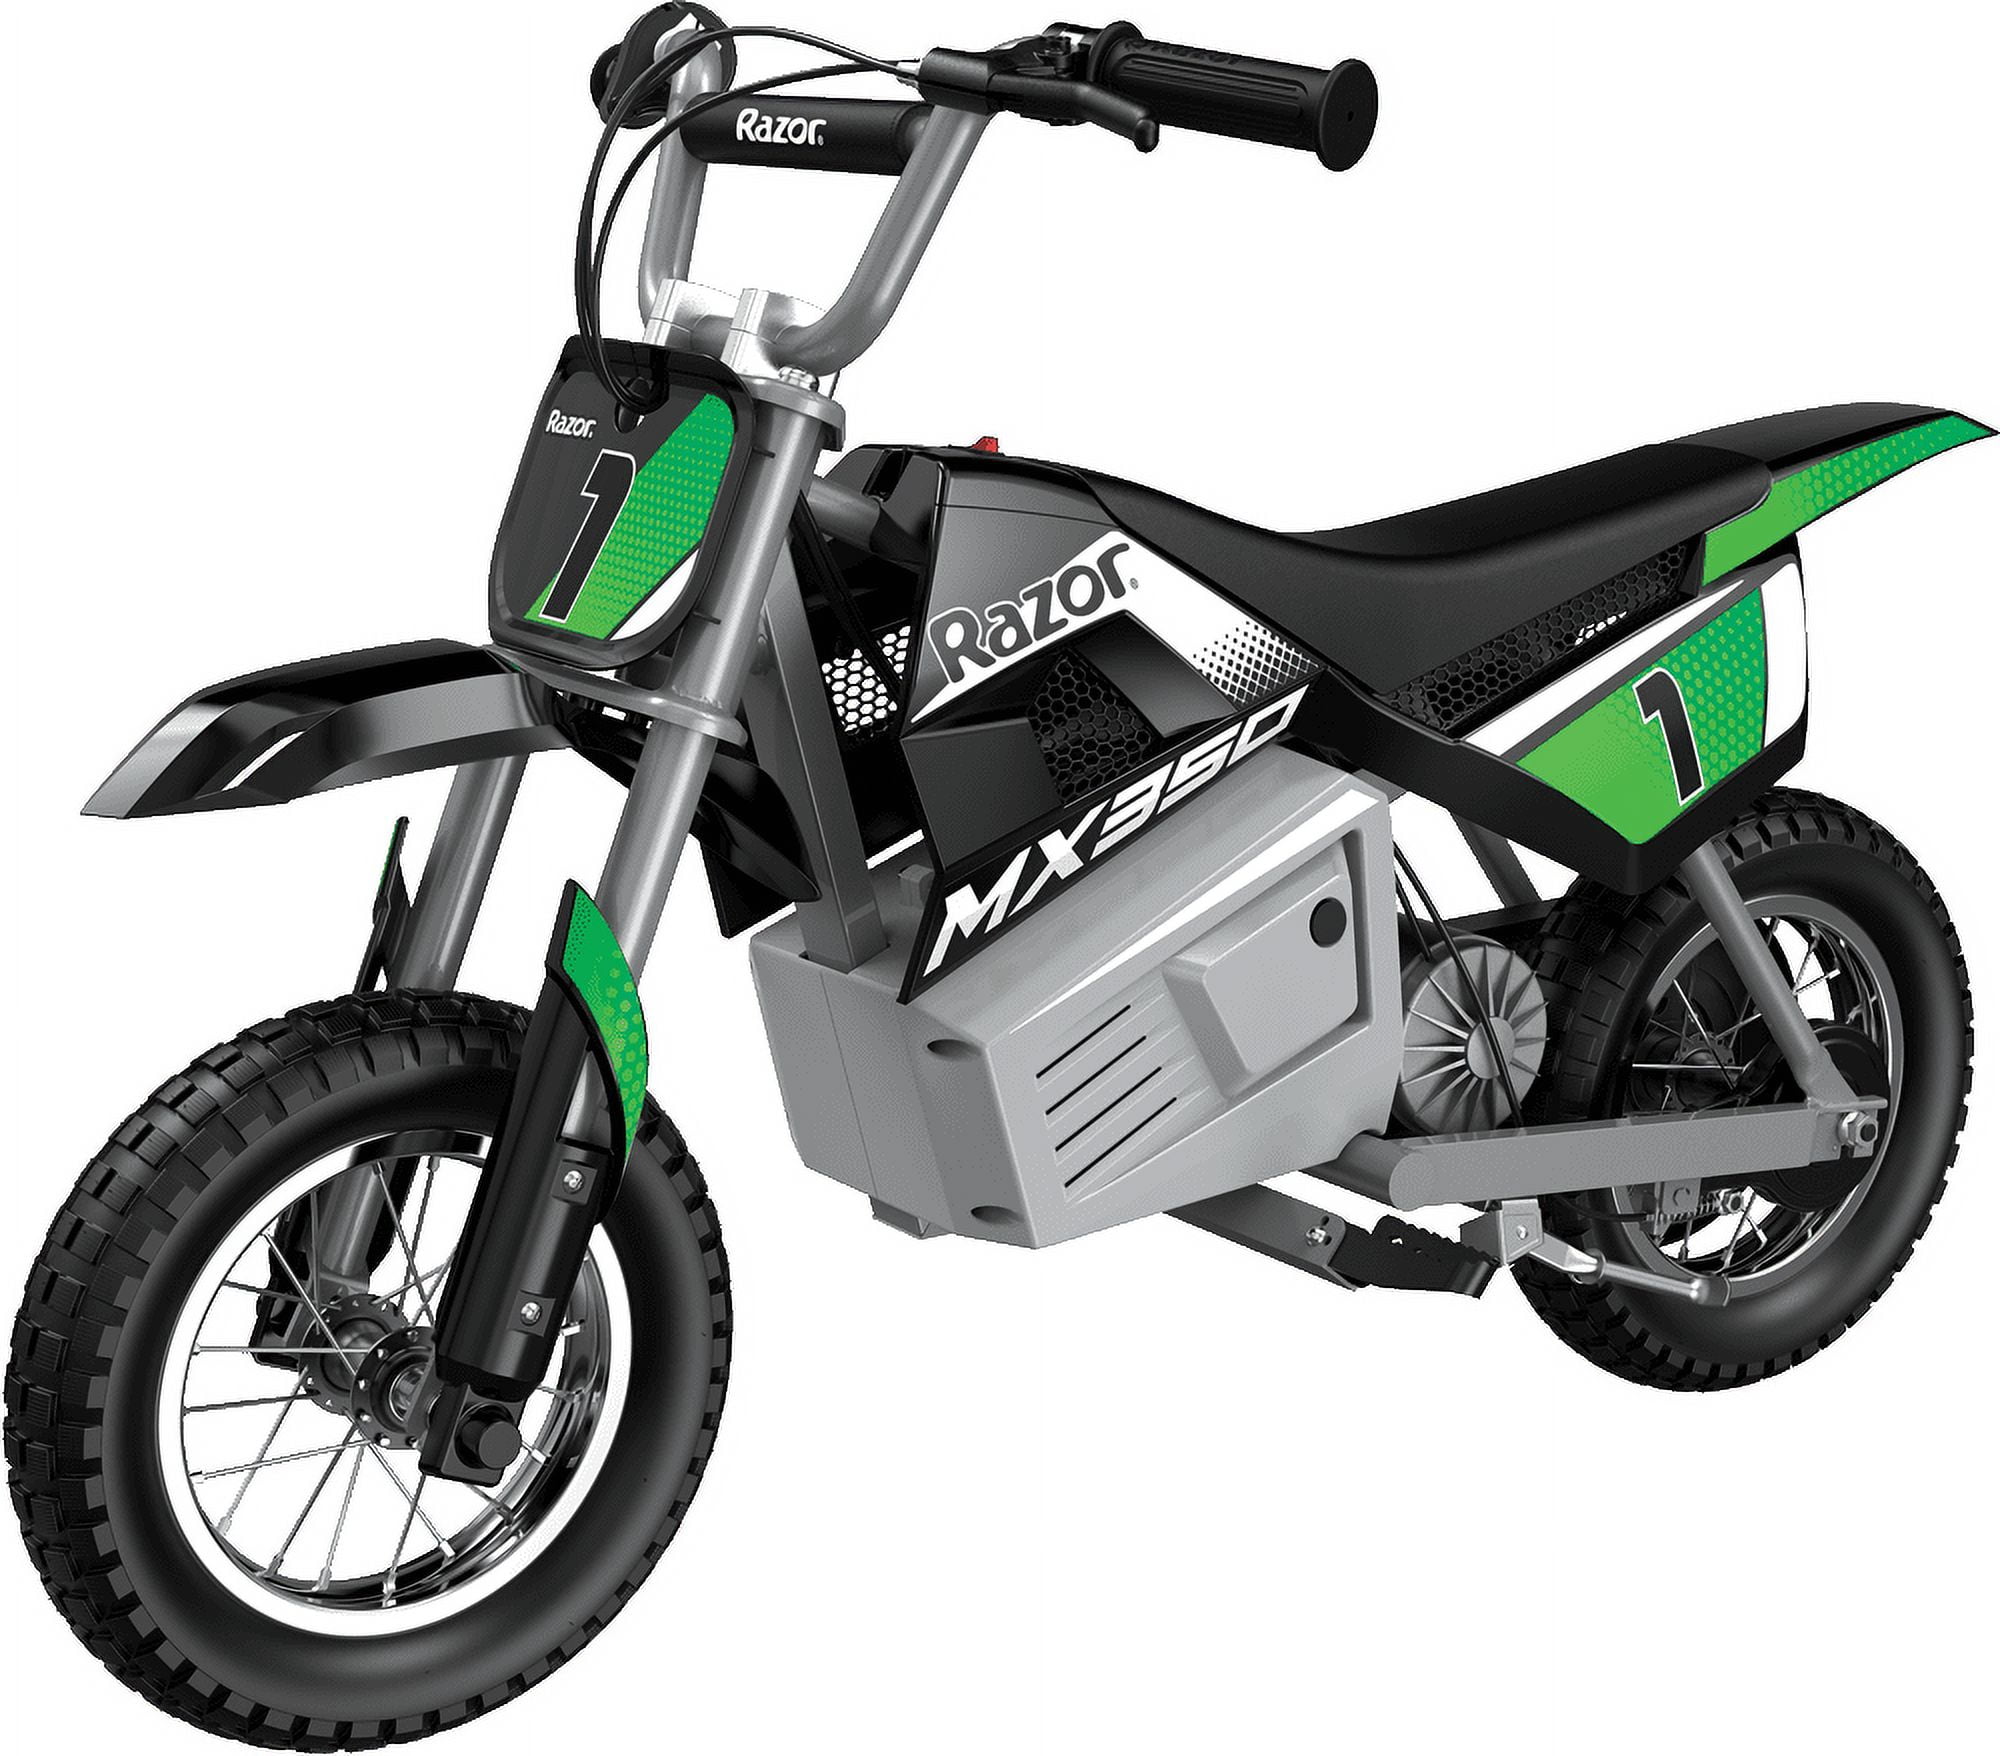 Razor Dirt Rocket MX350 - Black with Decals Included, 24V Electric-Powered Dirt  Bike for Kids 13+ 